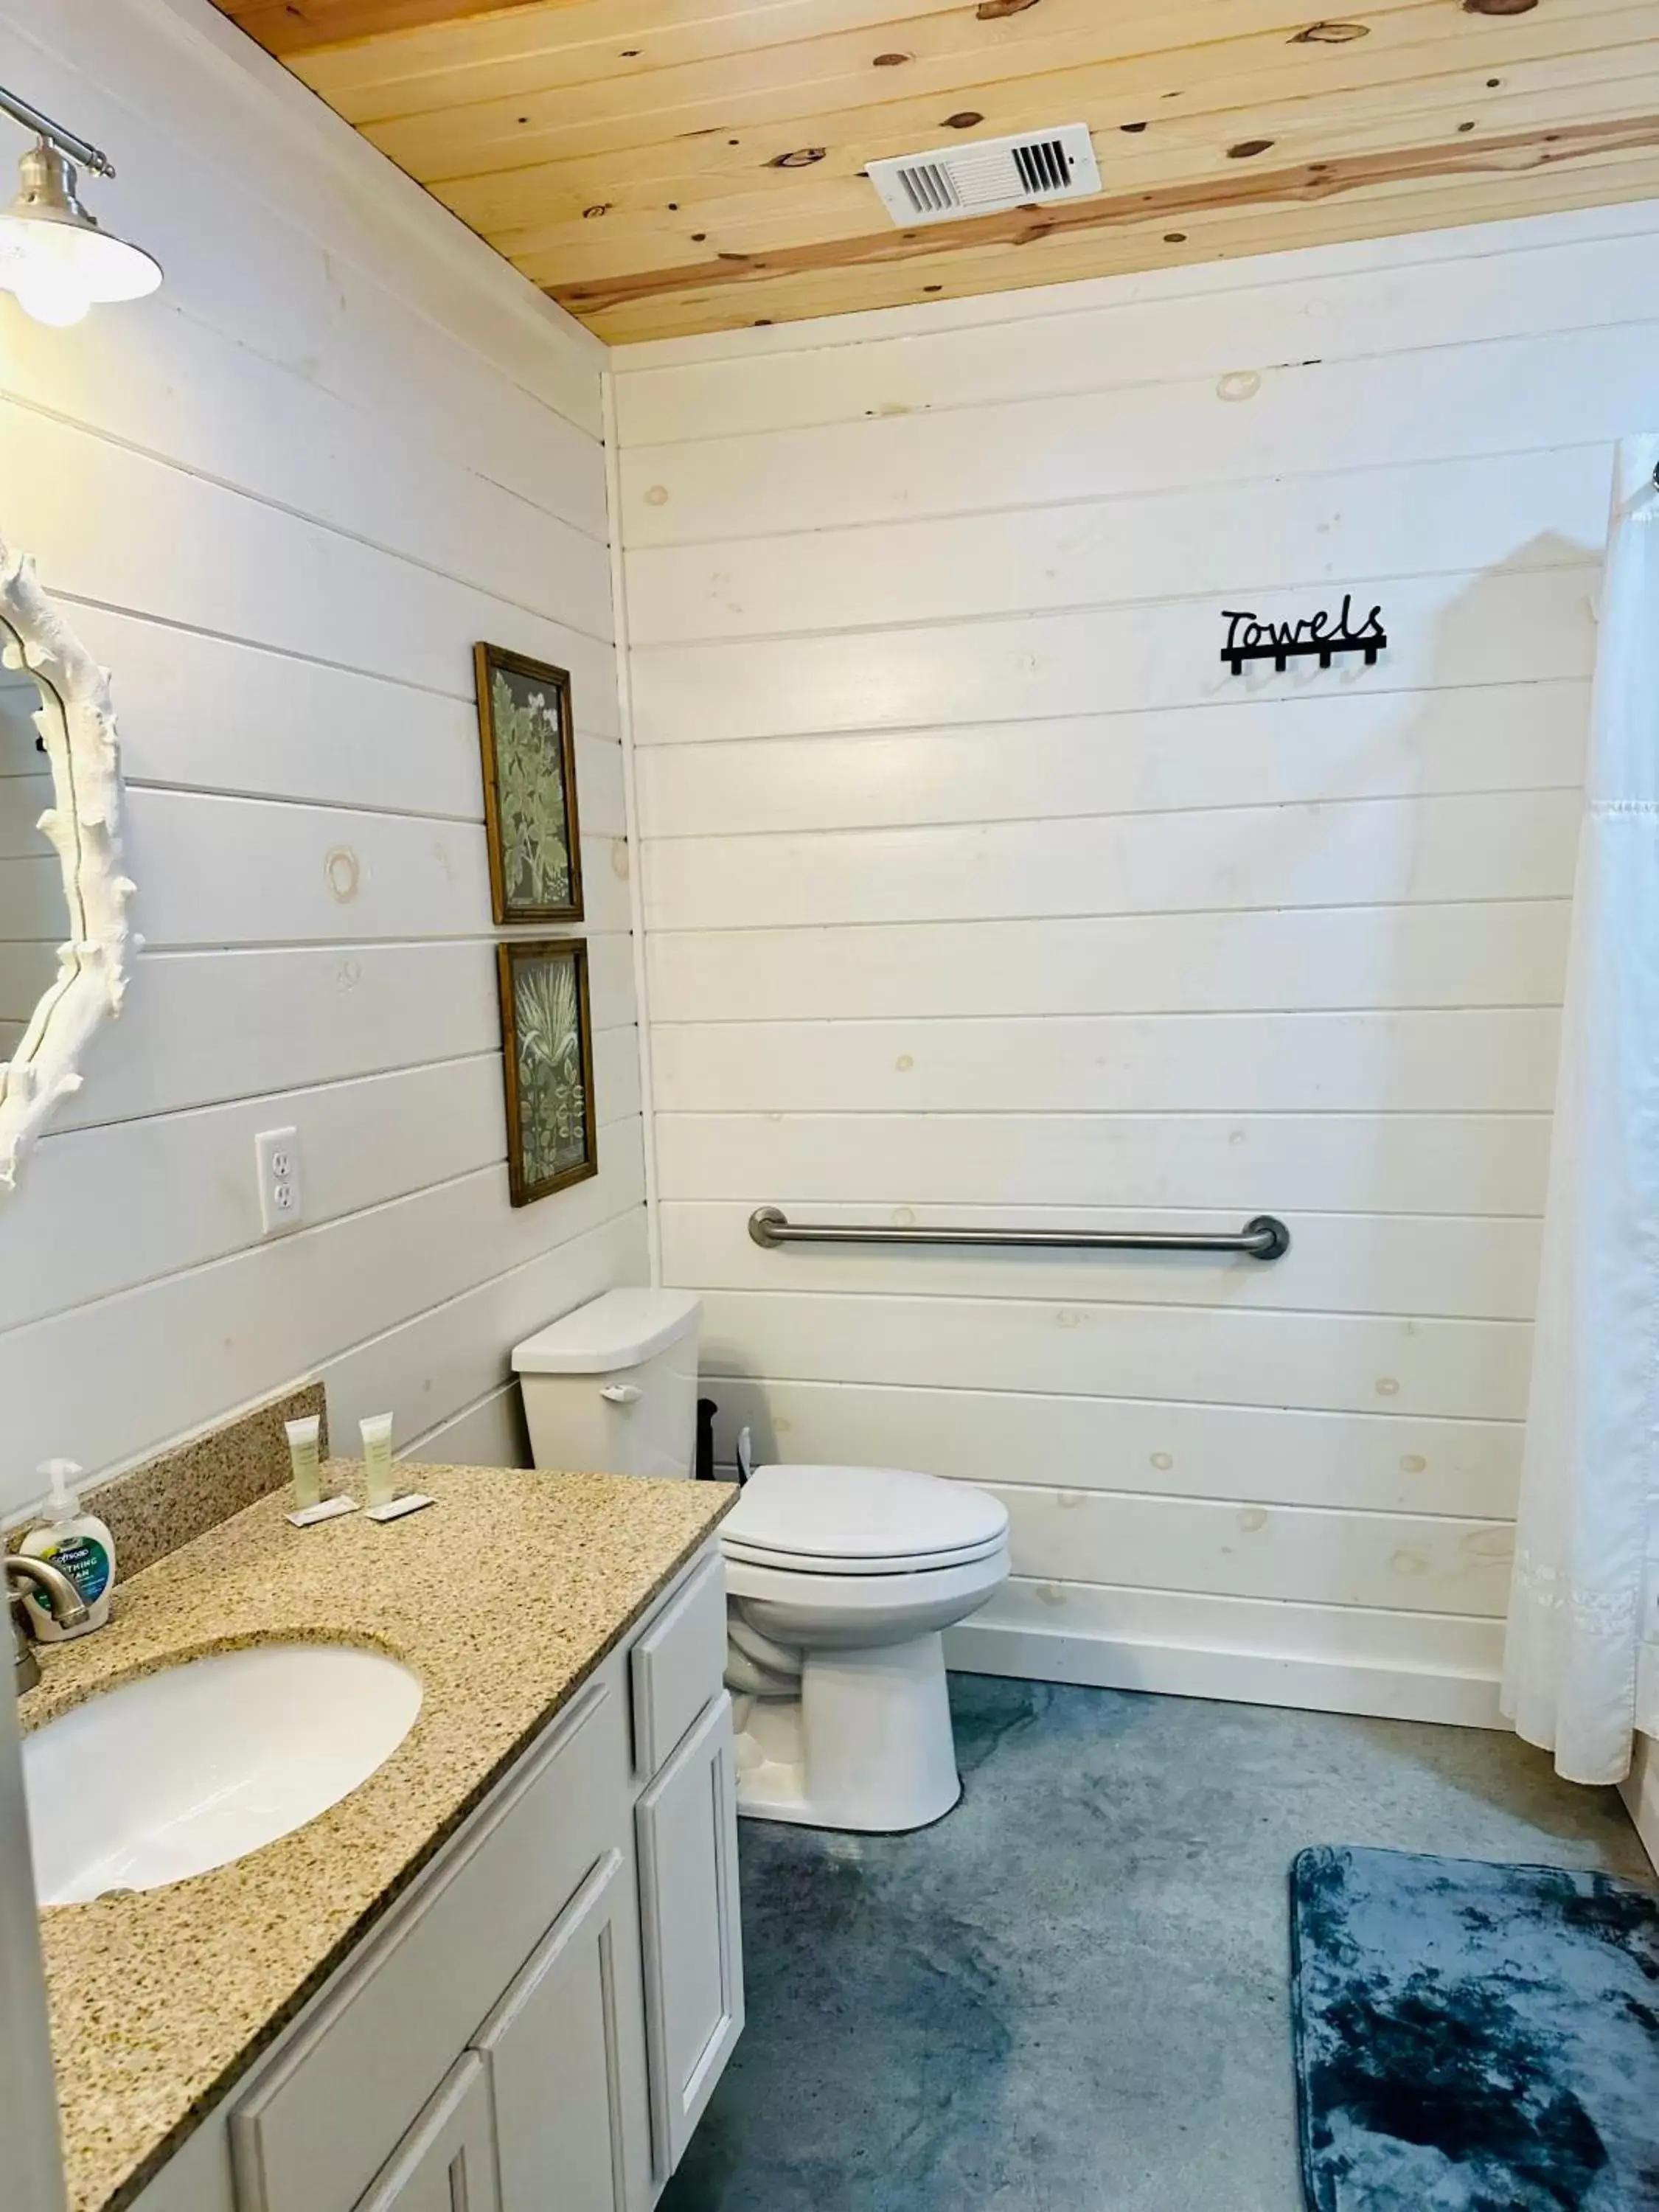 Toilet, Bathroom in Knotty Squirrel Cabins